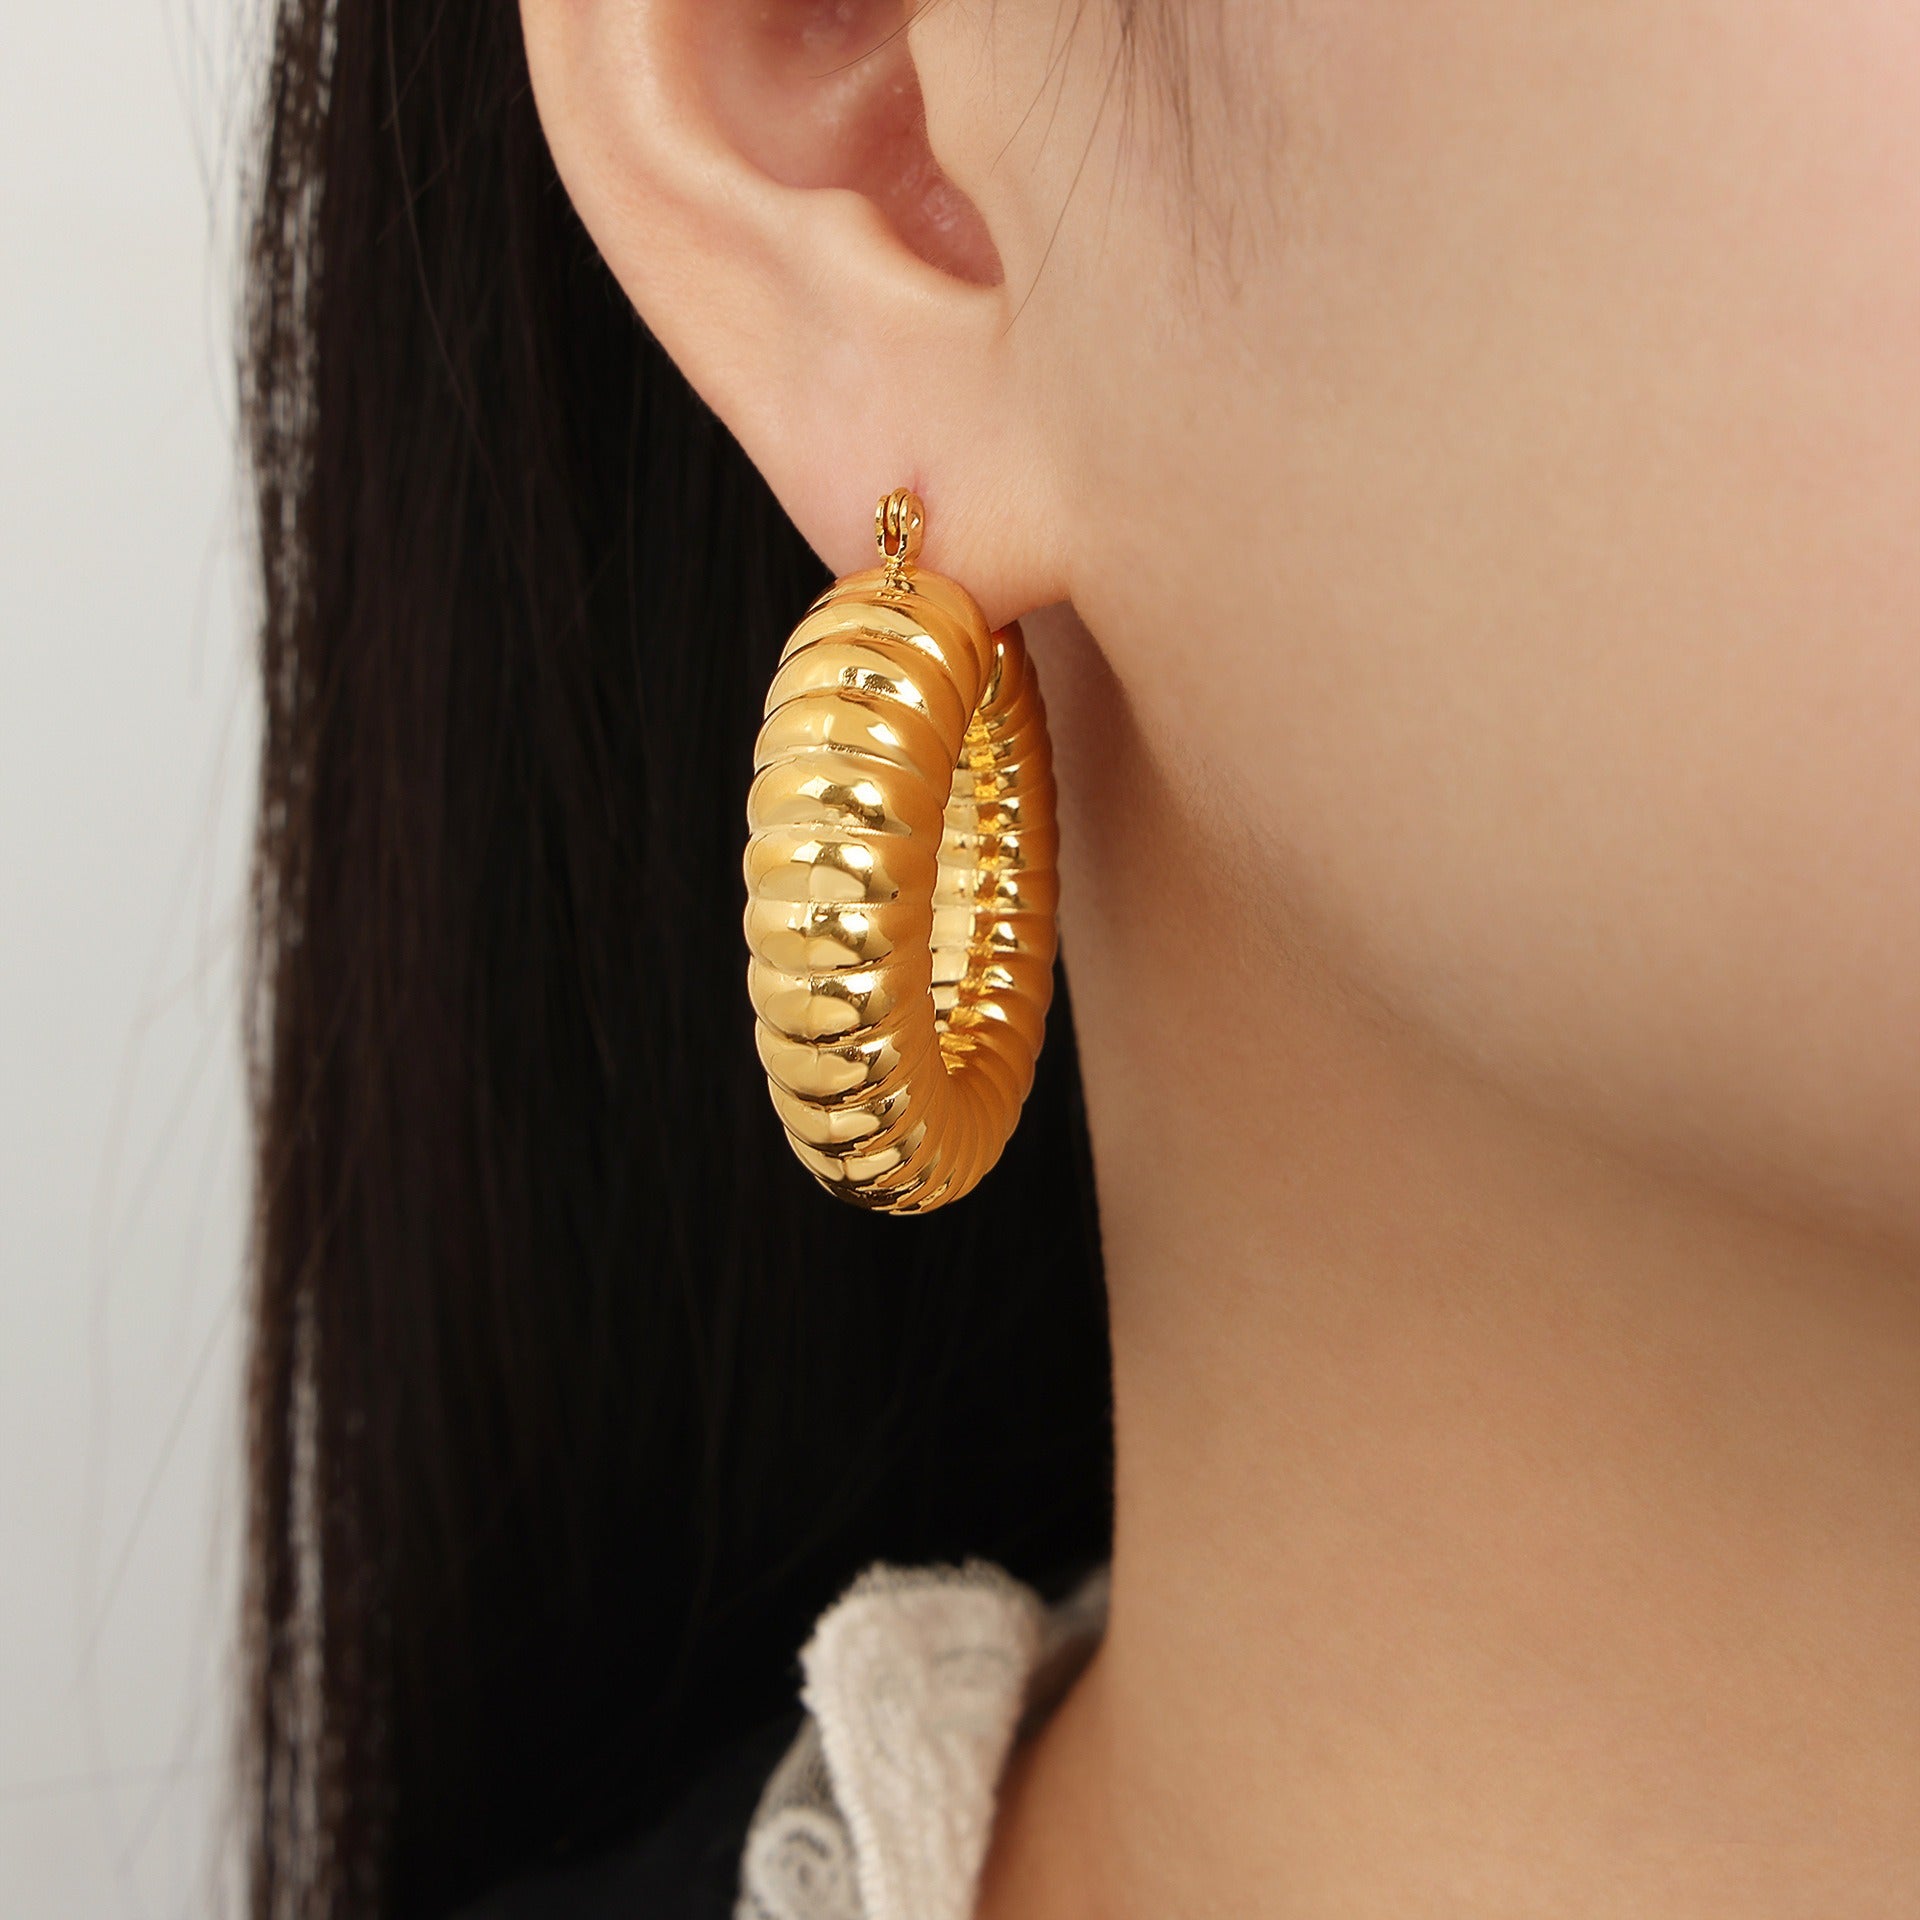 18K gold round earrings with twist design - JuVons